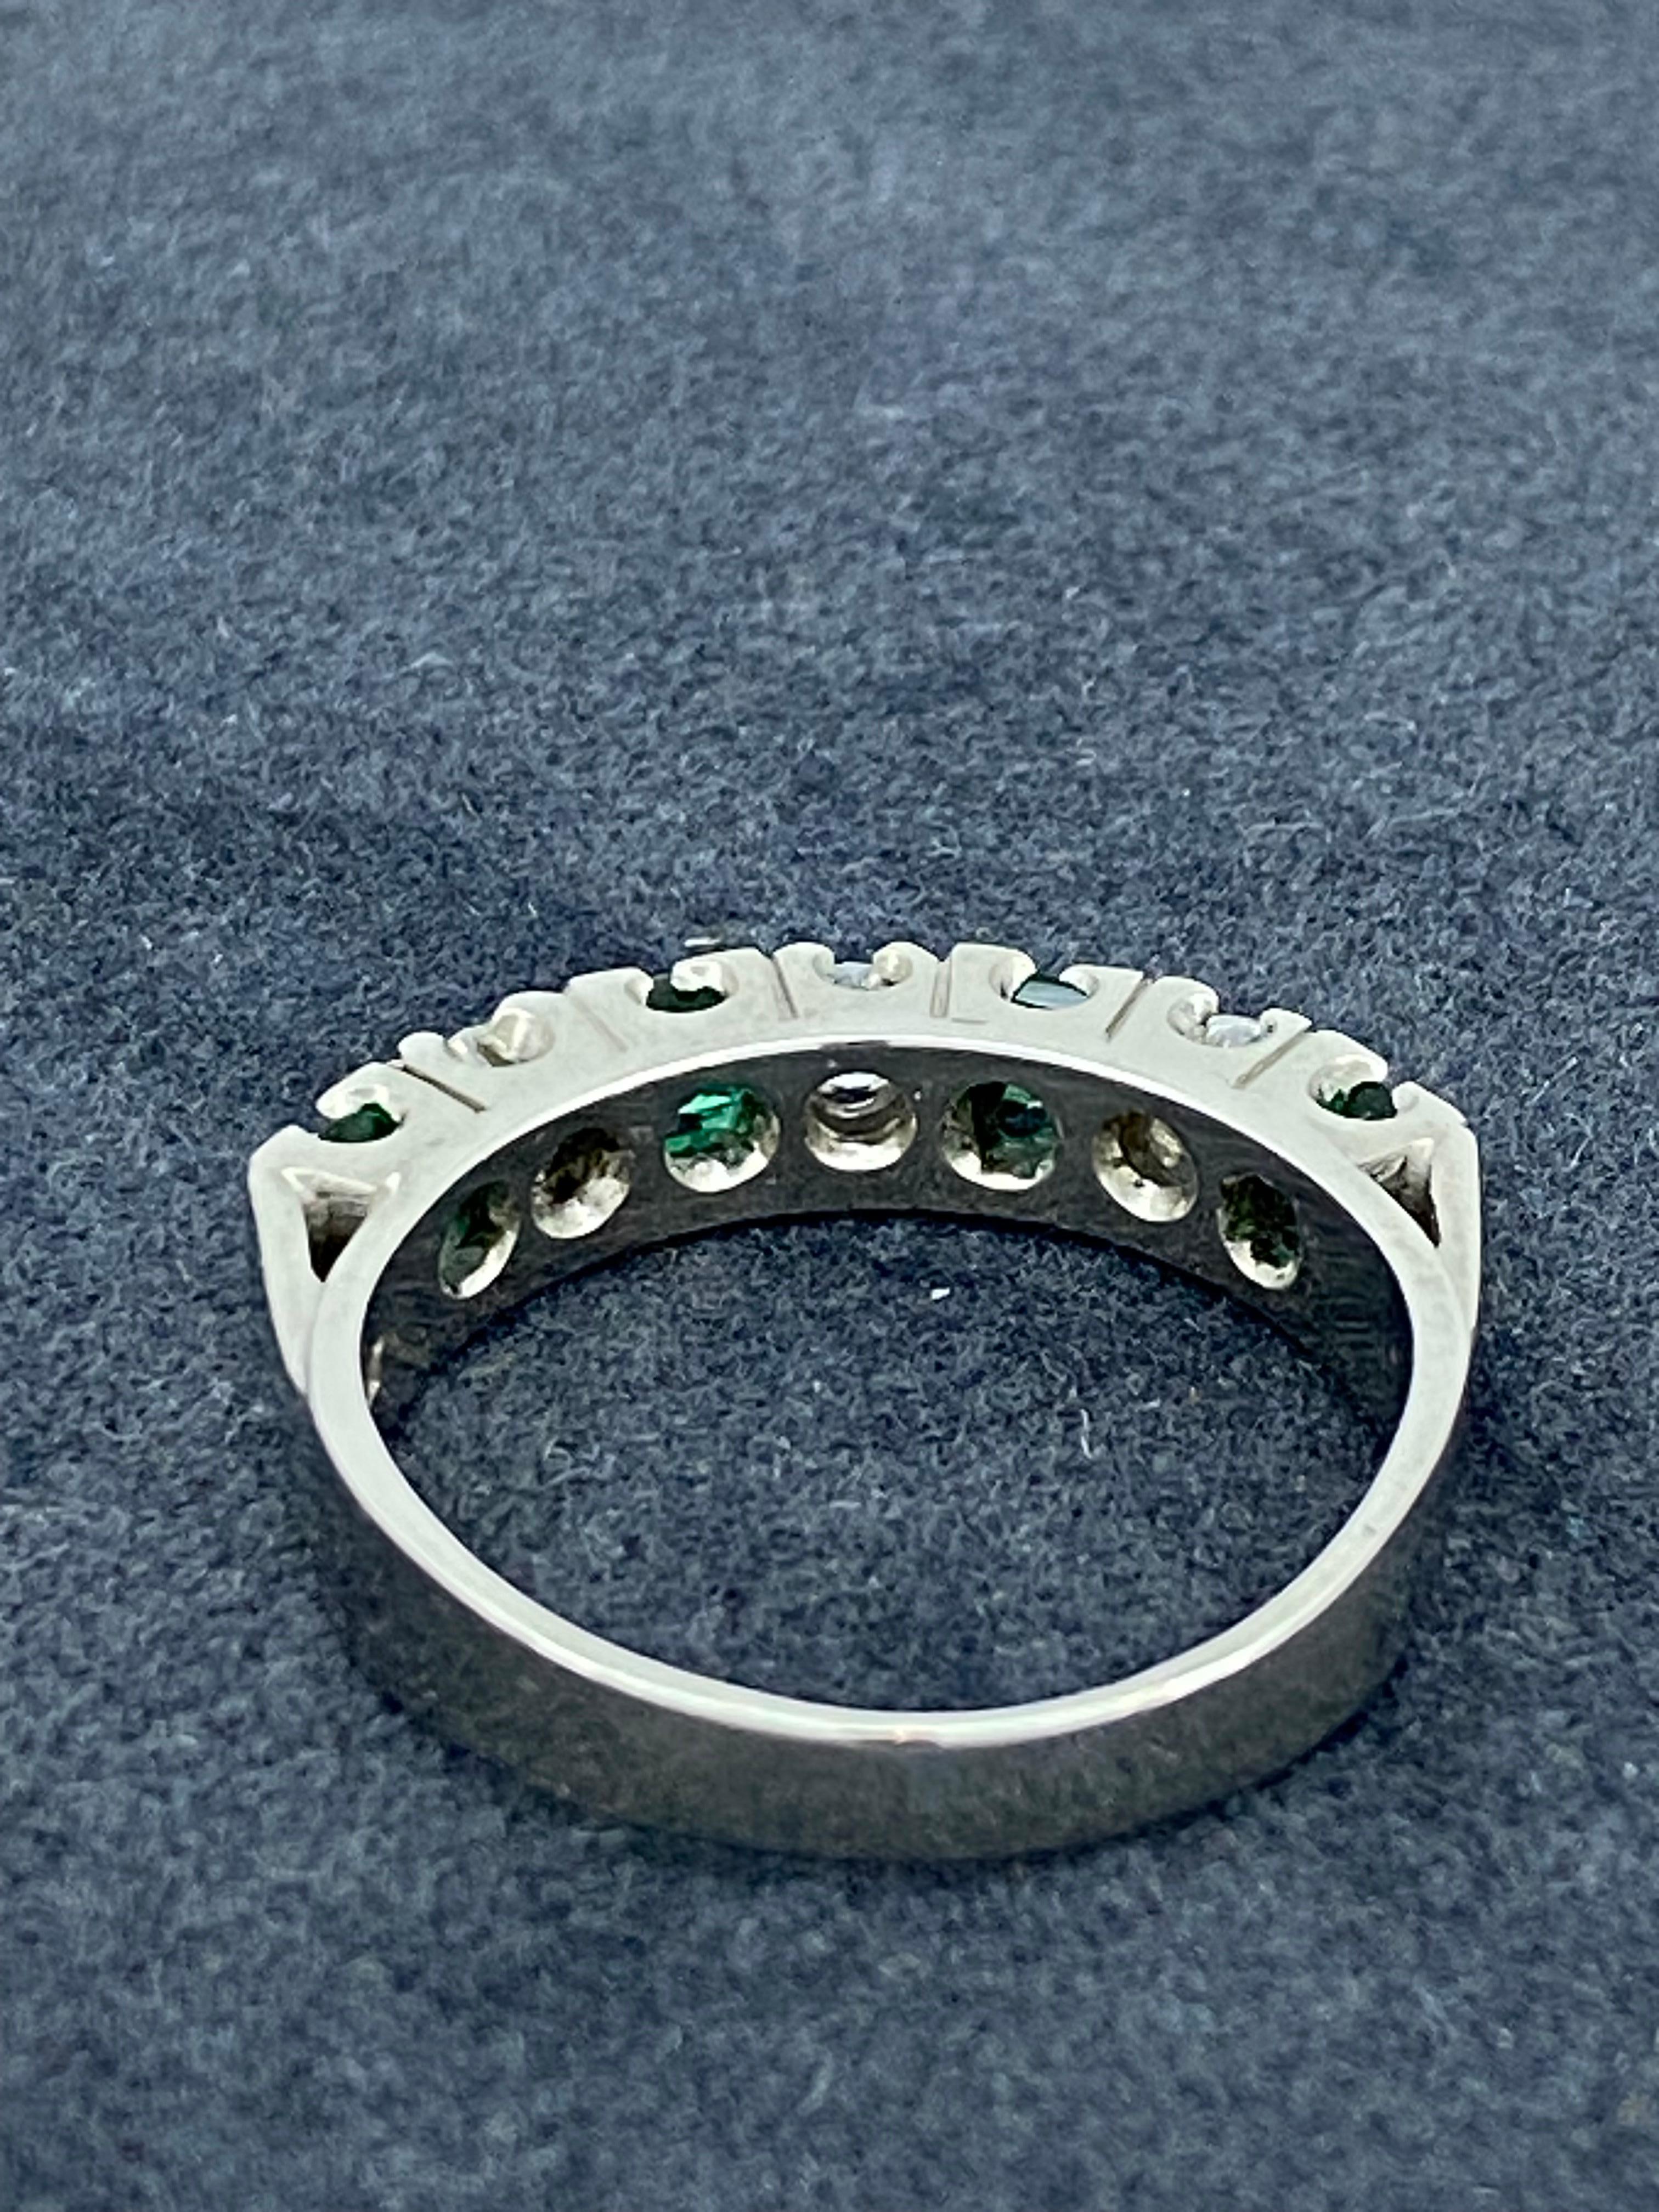 Princess Cut Colombian Emerald & Diamond Half Hoop Ring in Platinum & 18K White Gold, c1950's For Sale